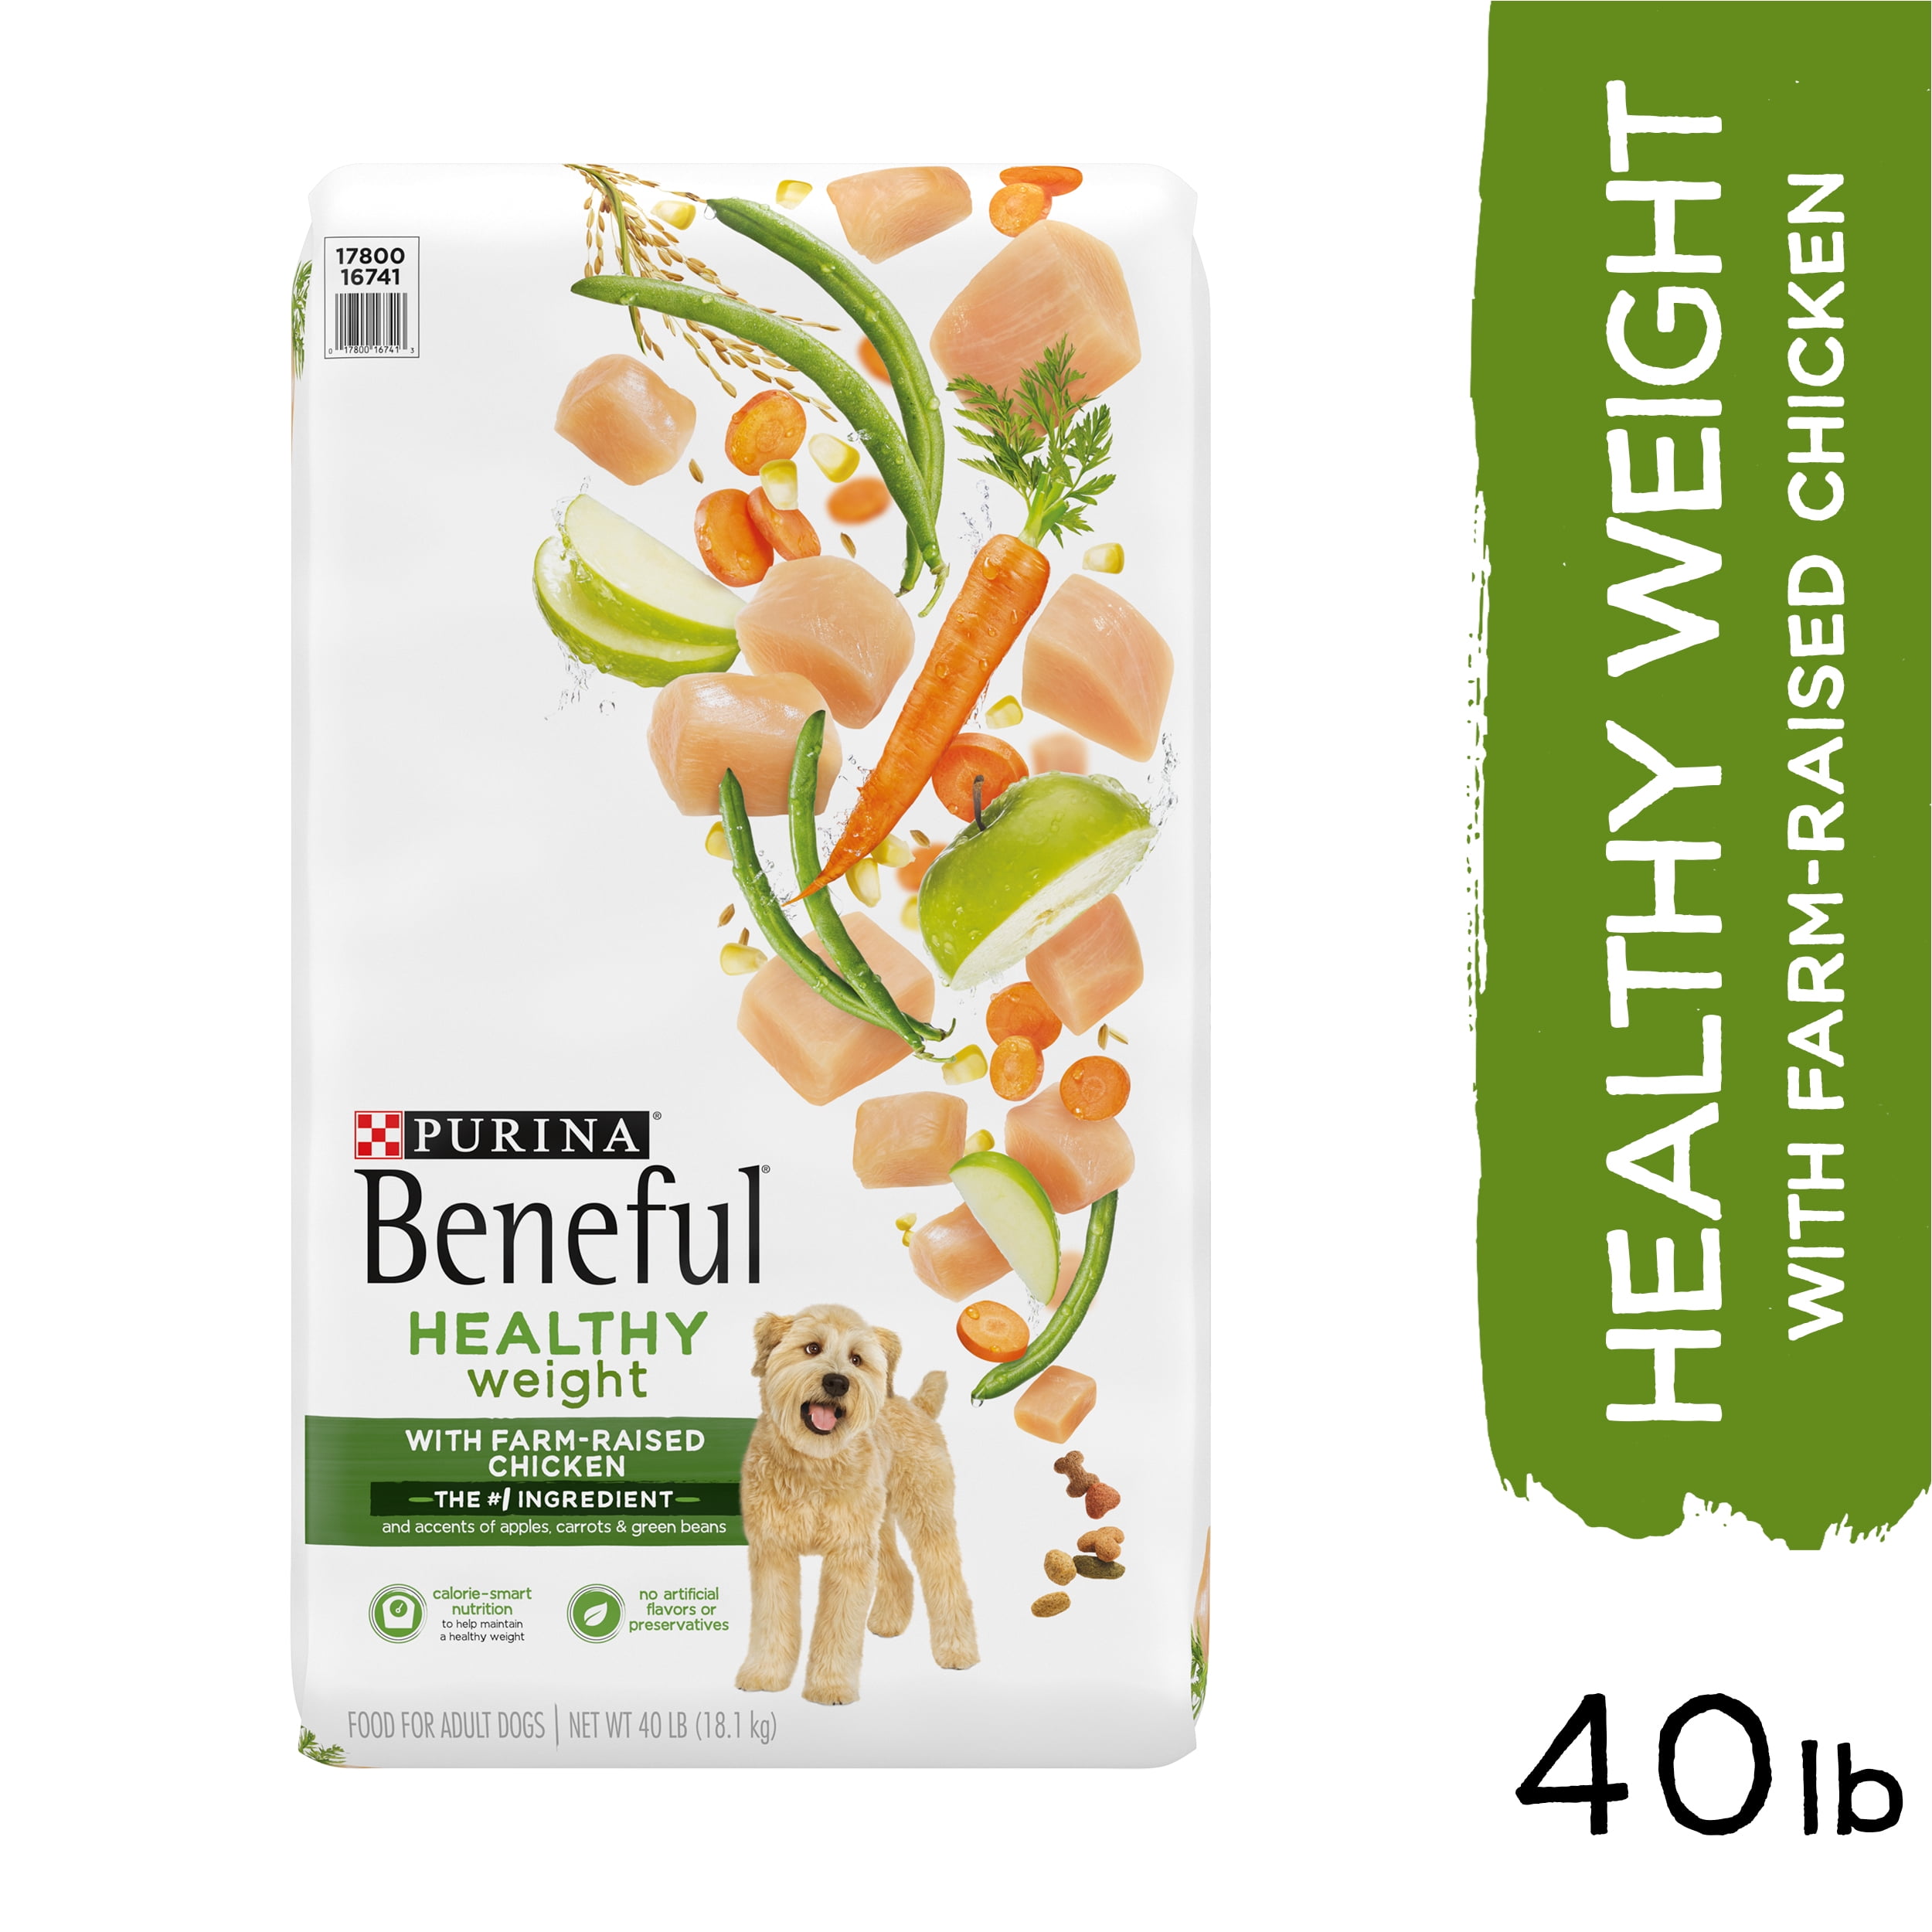 Purina Beneful Healthy Weight Dry Dog Food, Healthy Weight With Farm